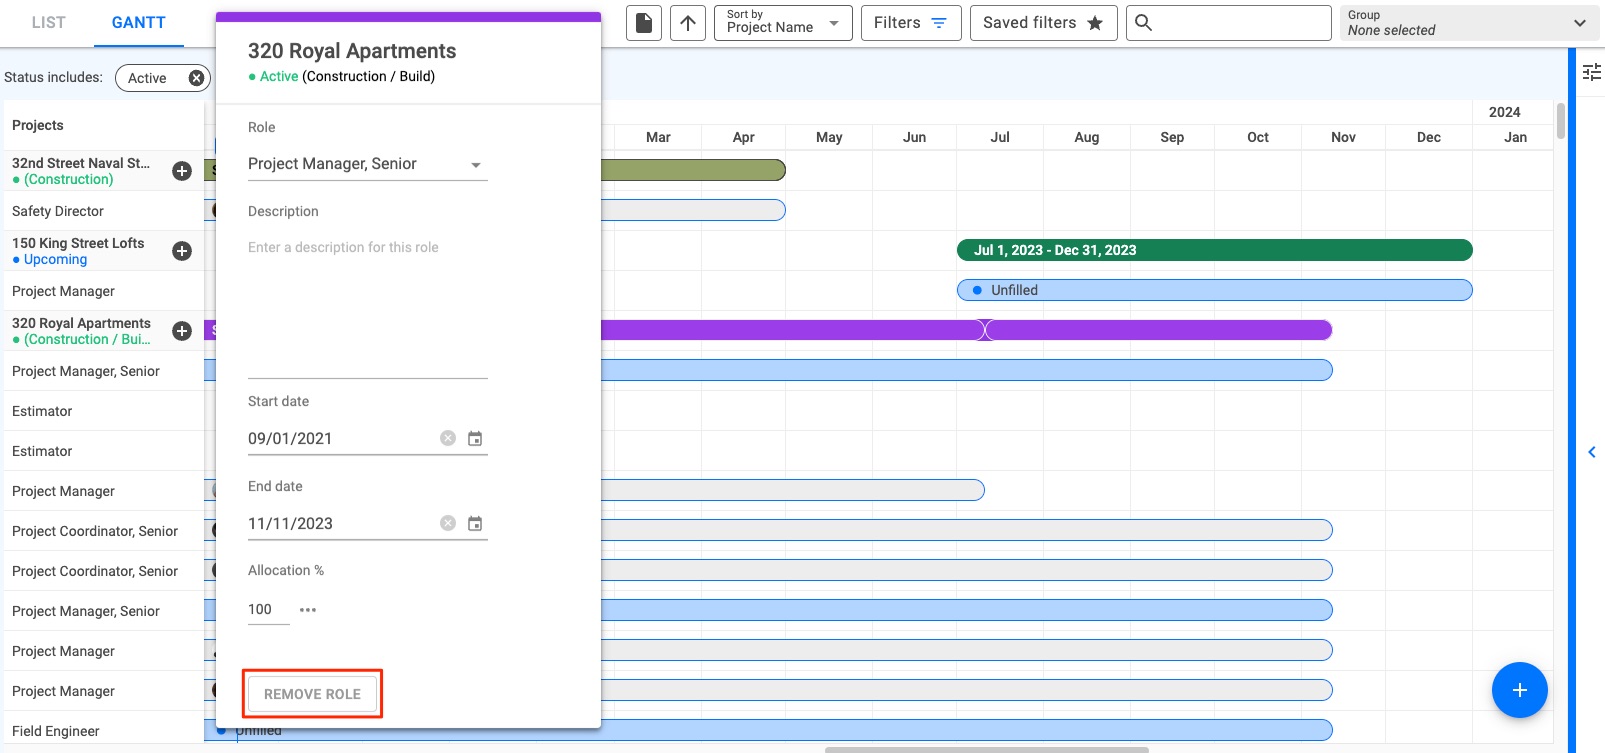 Article_Update_-_Managing_Roles_and_Allocations_From_the_Project_Gantt_-_1_6.jpg